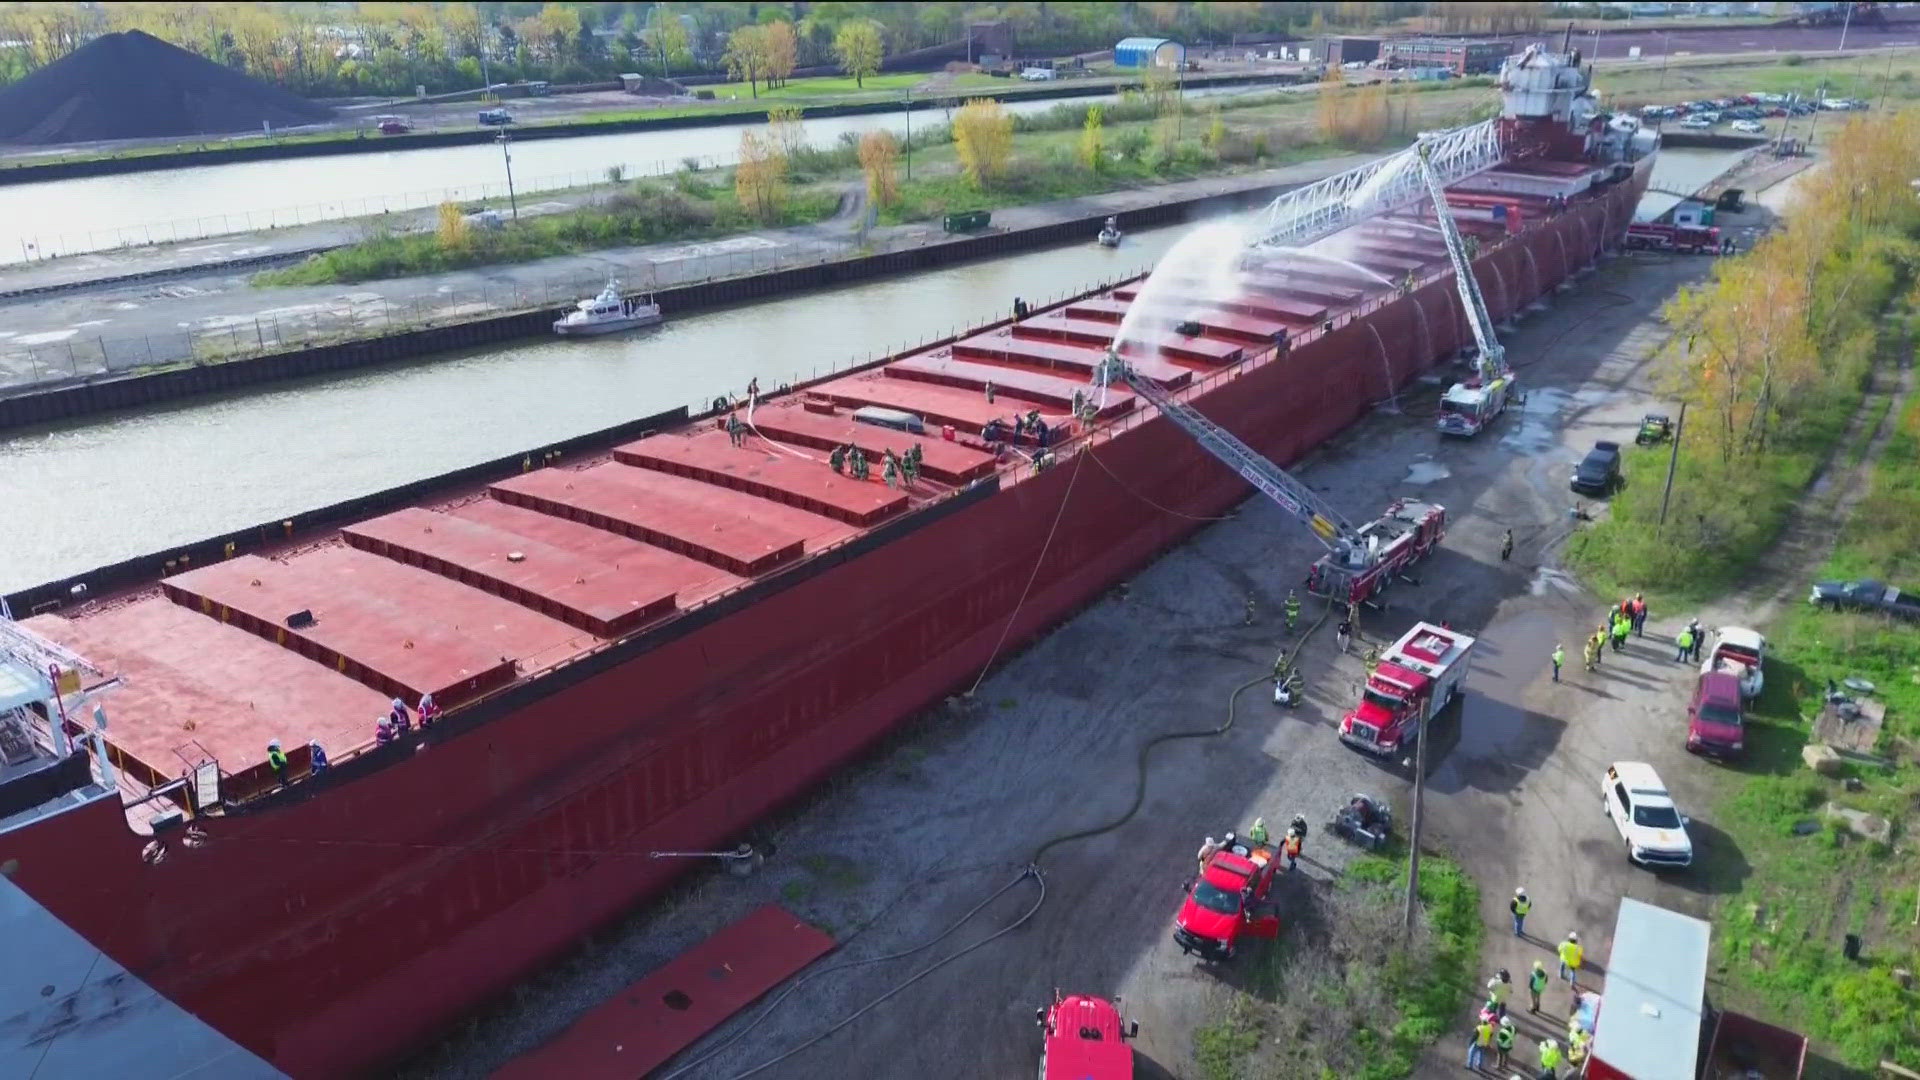 Firefighters from all over the Great Lakes Region came to Oregon this week to learn how best to attack freighter fires both on the lake and while docked.